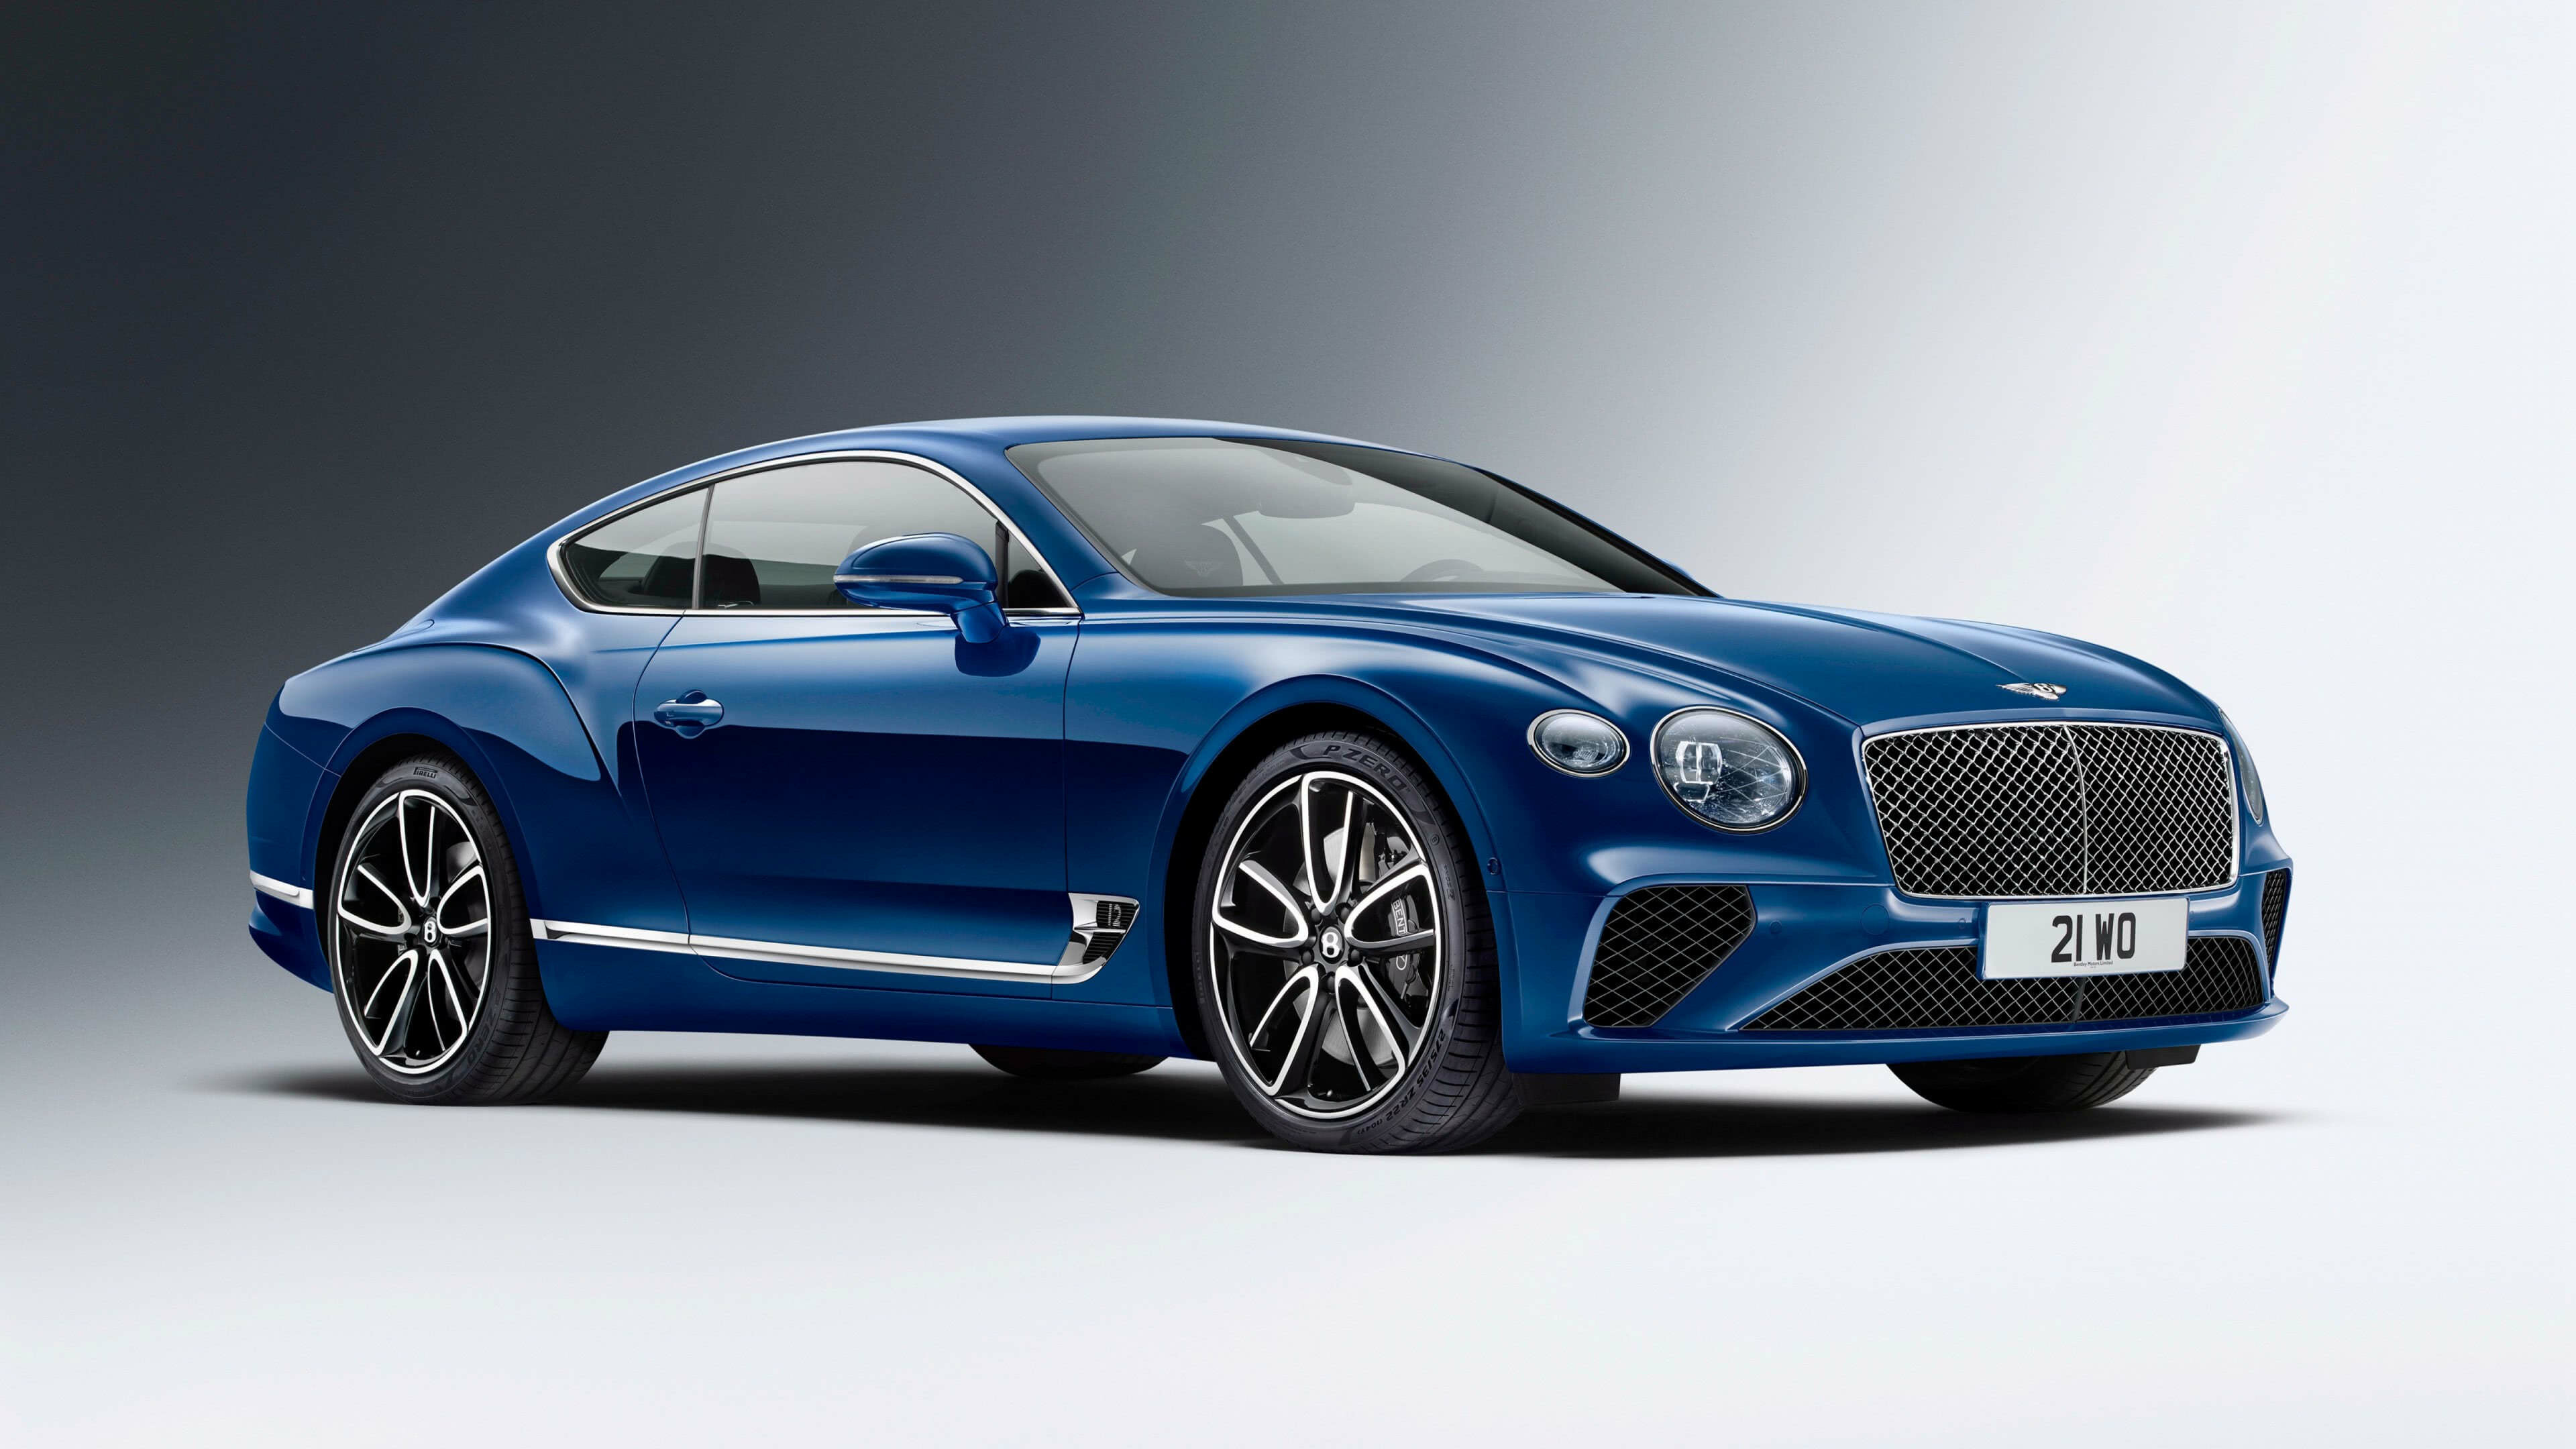 Bentley: The Continental GT is equipped with a 6.0-liter twin-turbocharged W12 engine, which produces a DIN-rated power output of 560 PS at 6,100 rpm. 3840x2160 4K Wallpaper.